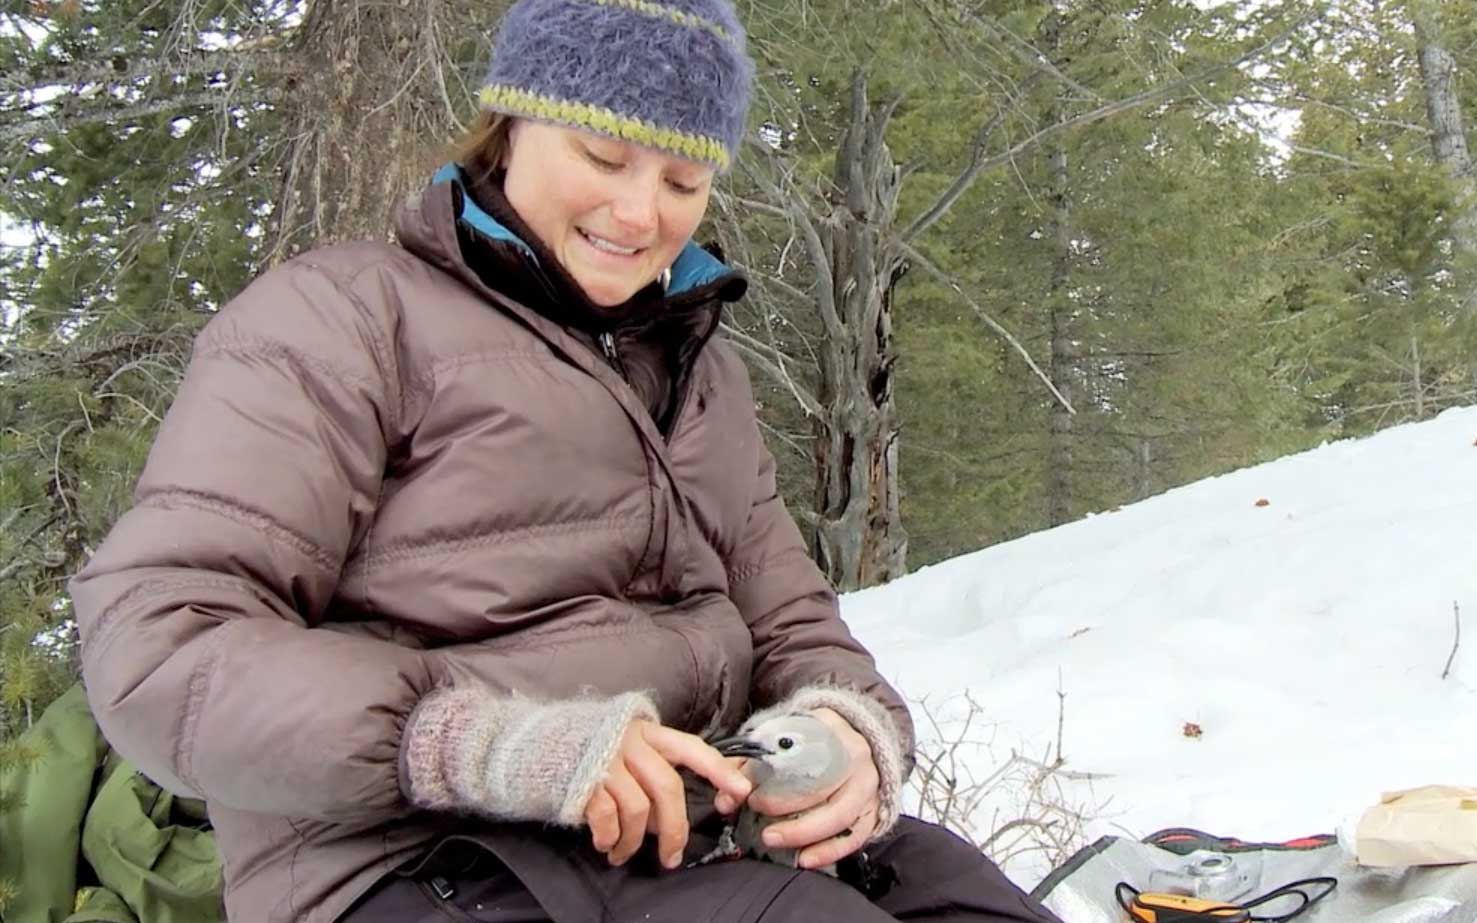 Taza Schaming gets her finger pinched by a Clark's Nutcracker